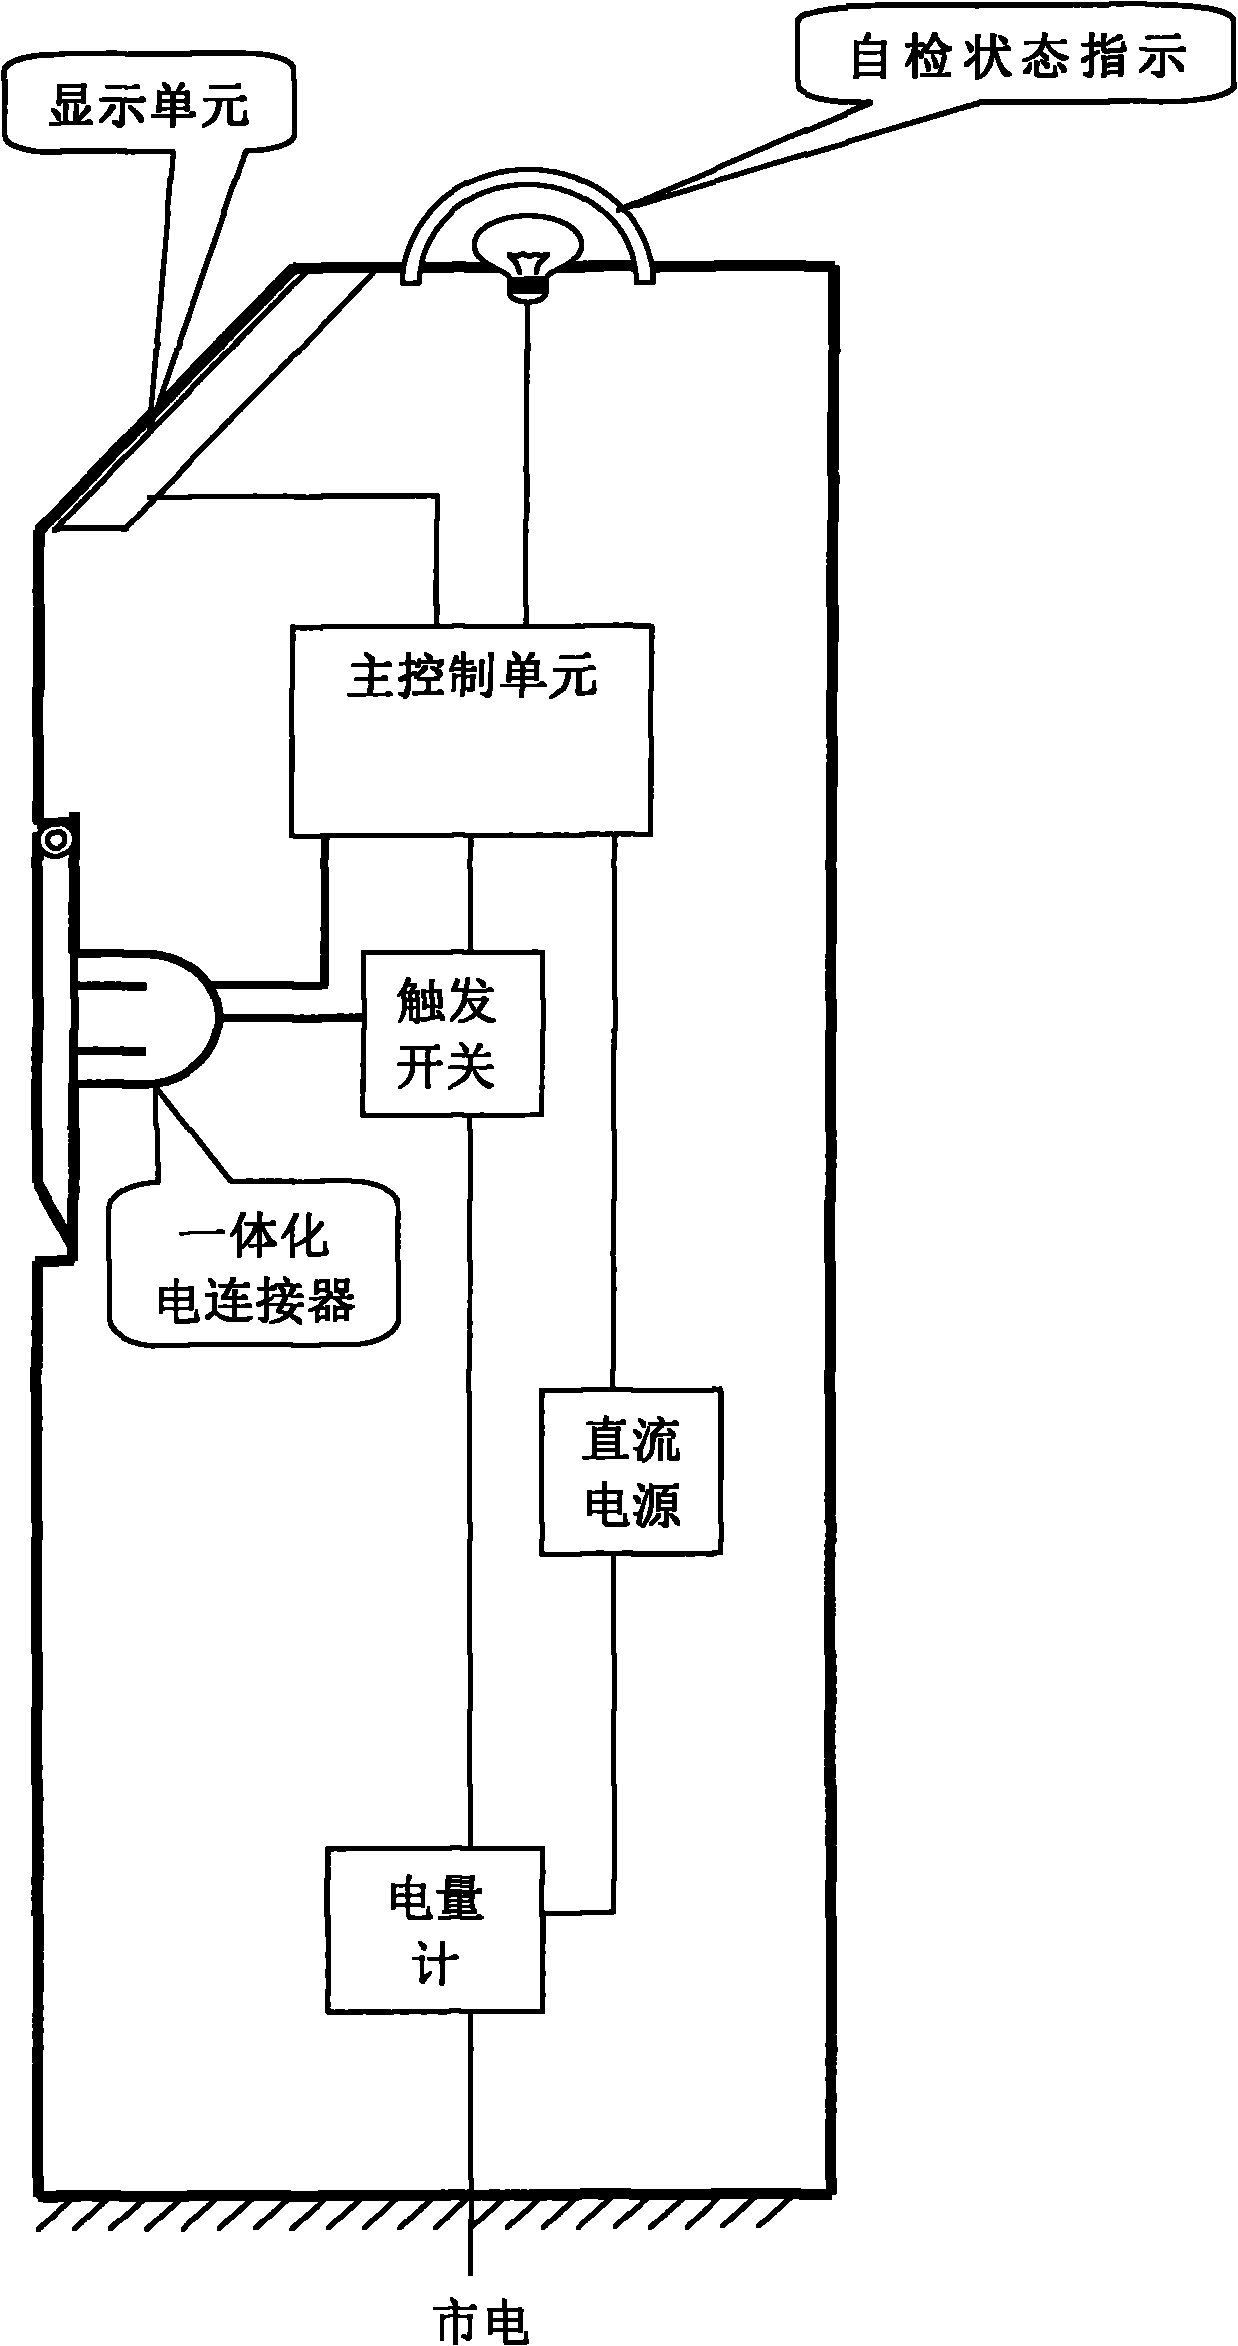 Charging method of charging pile for supplying charging service to electromobile